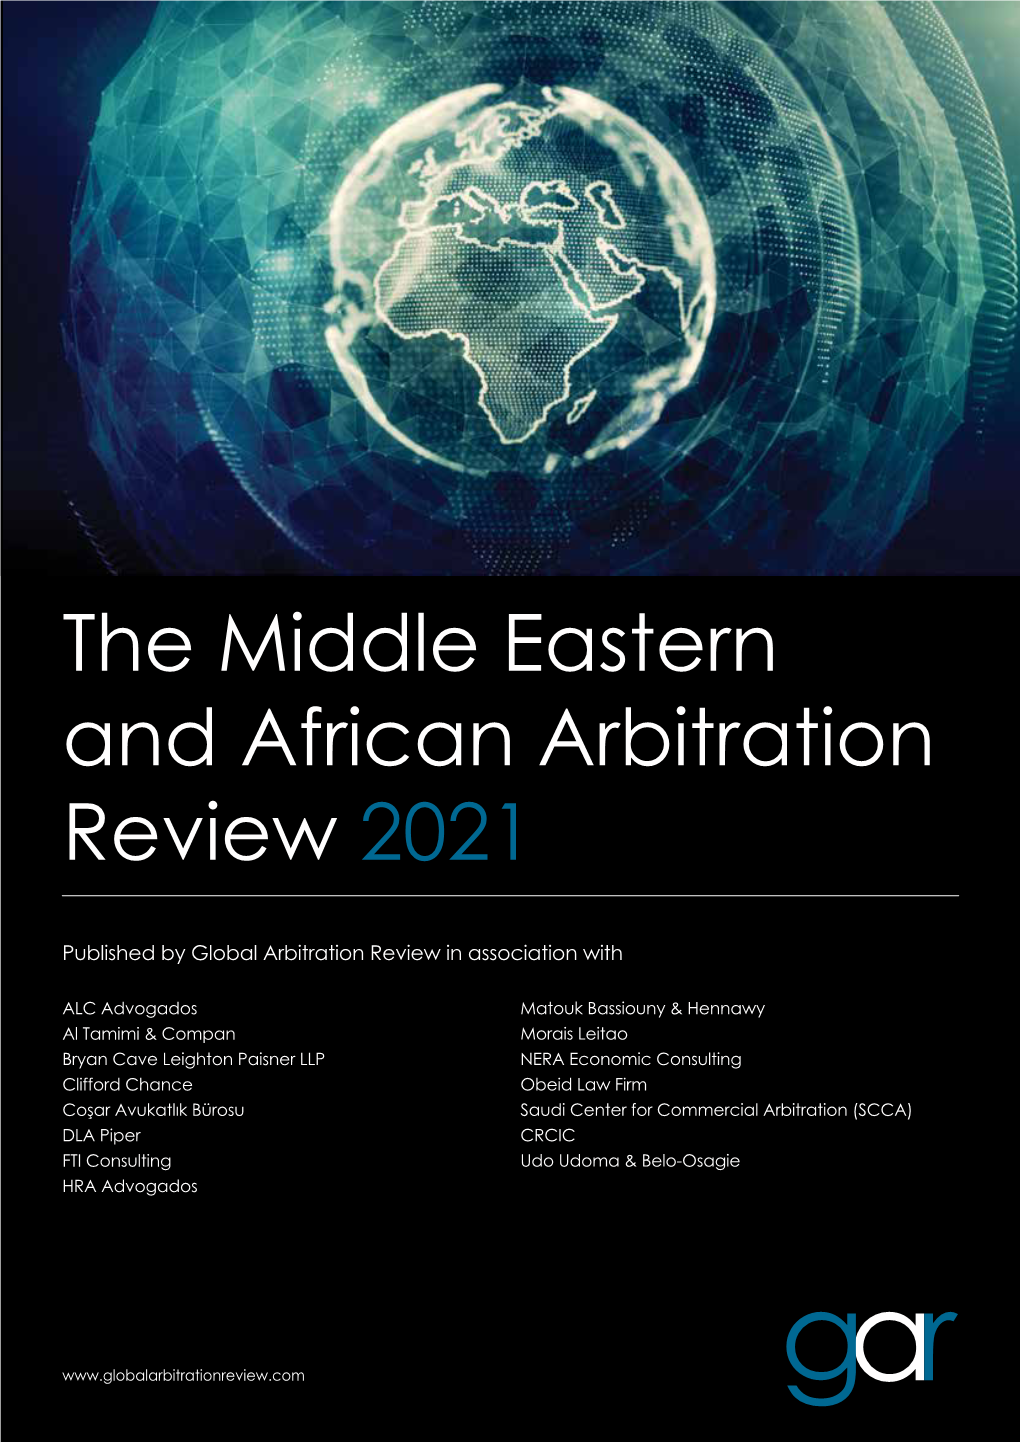 The Middle Eastern and African Arbitration Review 2021 –